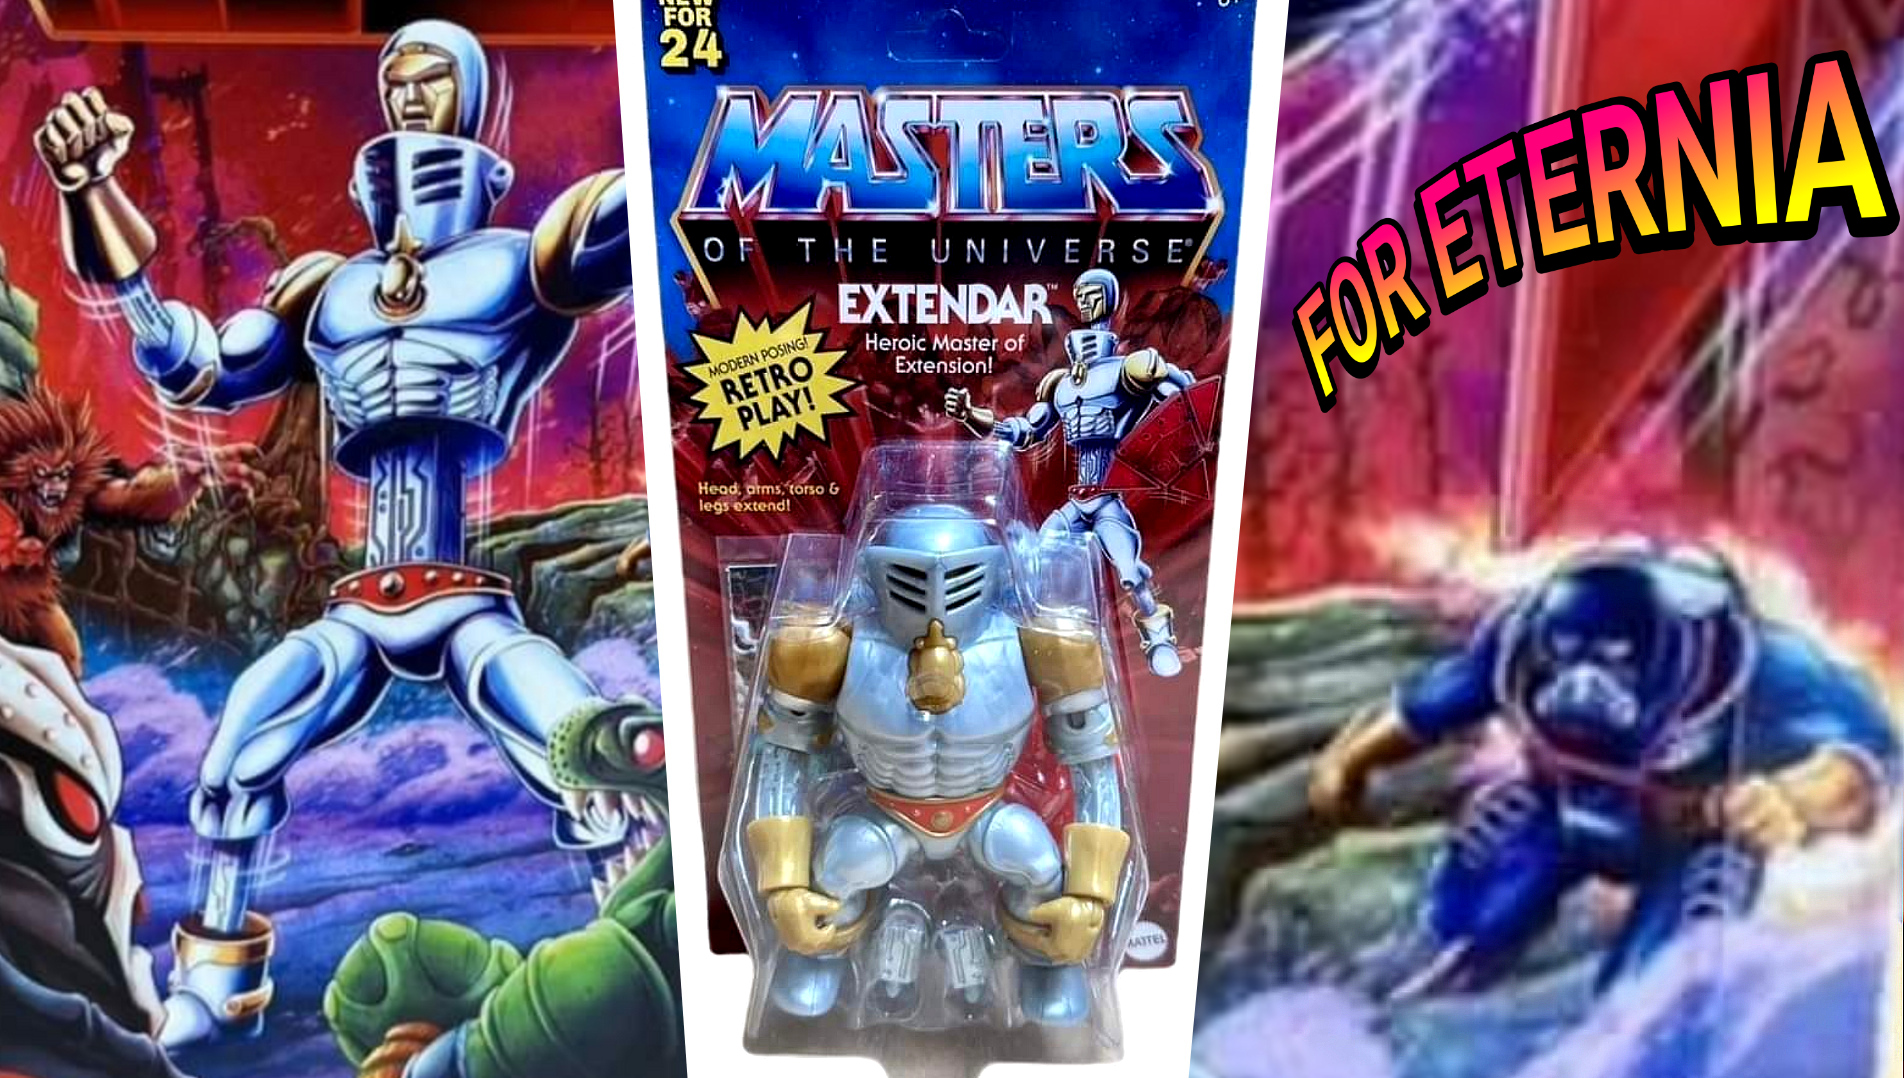 First look at the Masters of the Universe: Origins EXTENDAR figure in Packaging